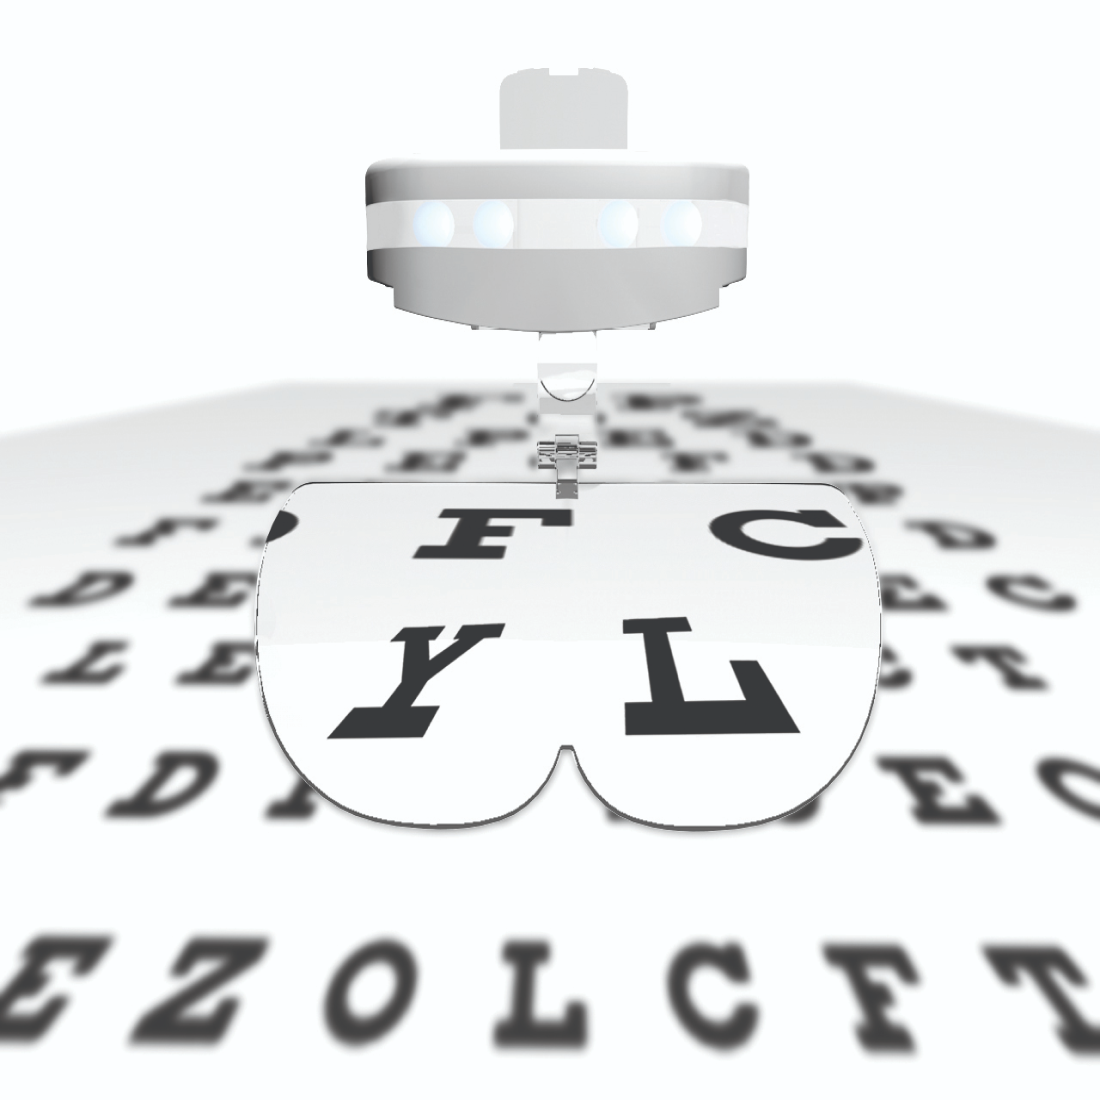 An Younilook Cosmetic Readers eye chart for vision assistance by Michael Todd Beauty.